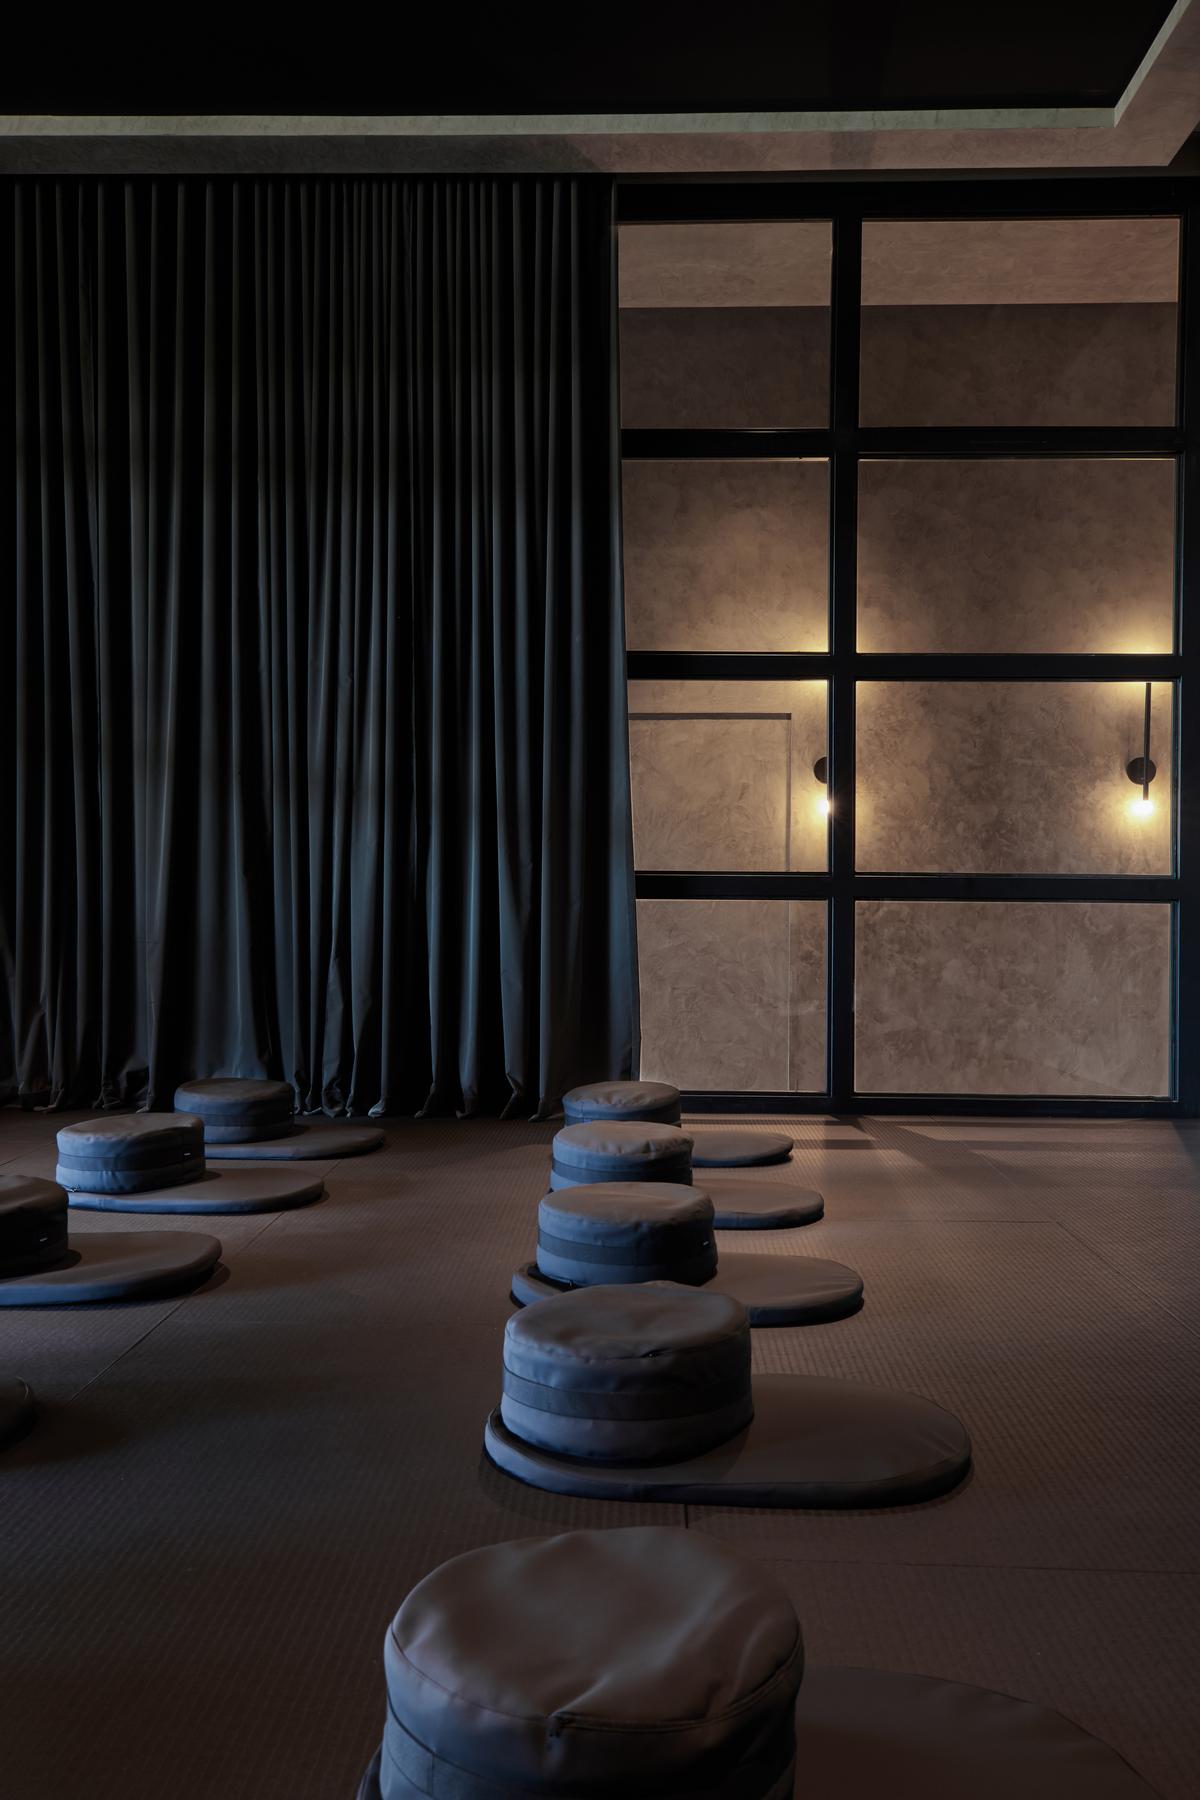 The centre's meditation room has been designed for solitude and reflection